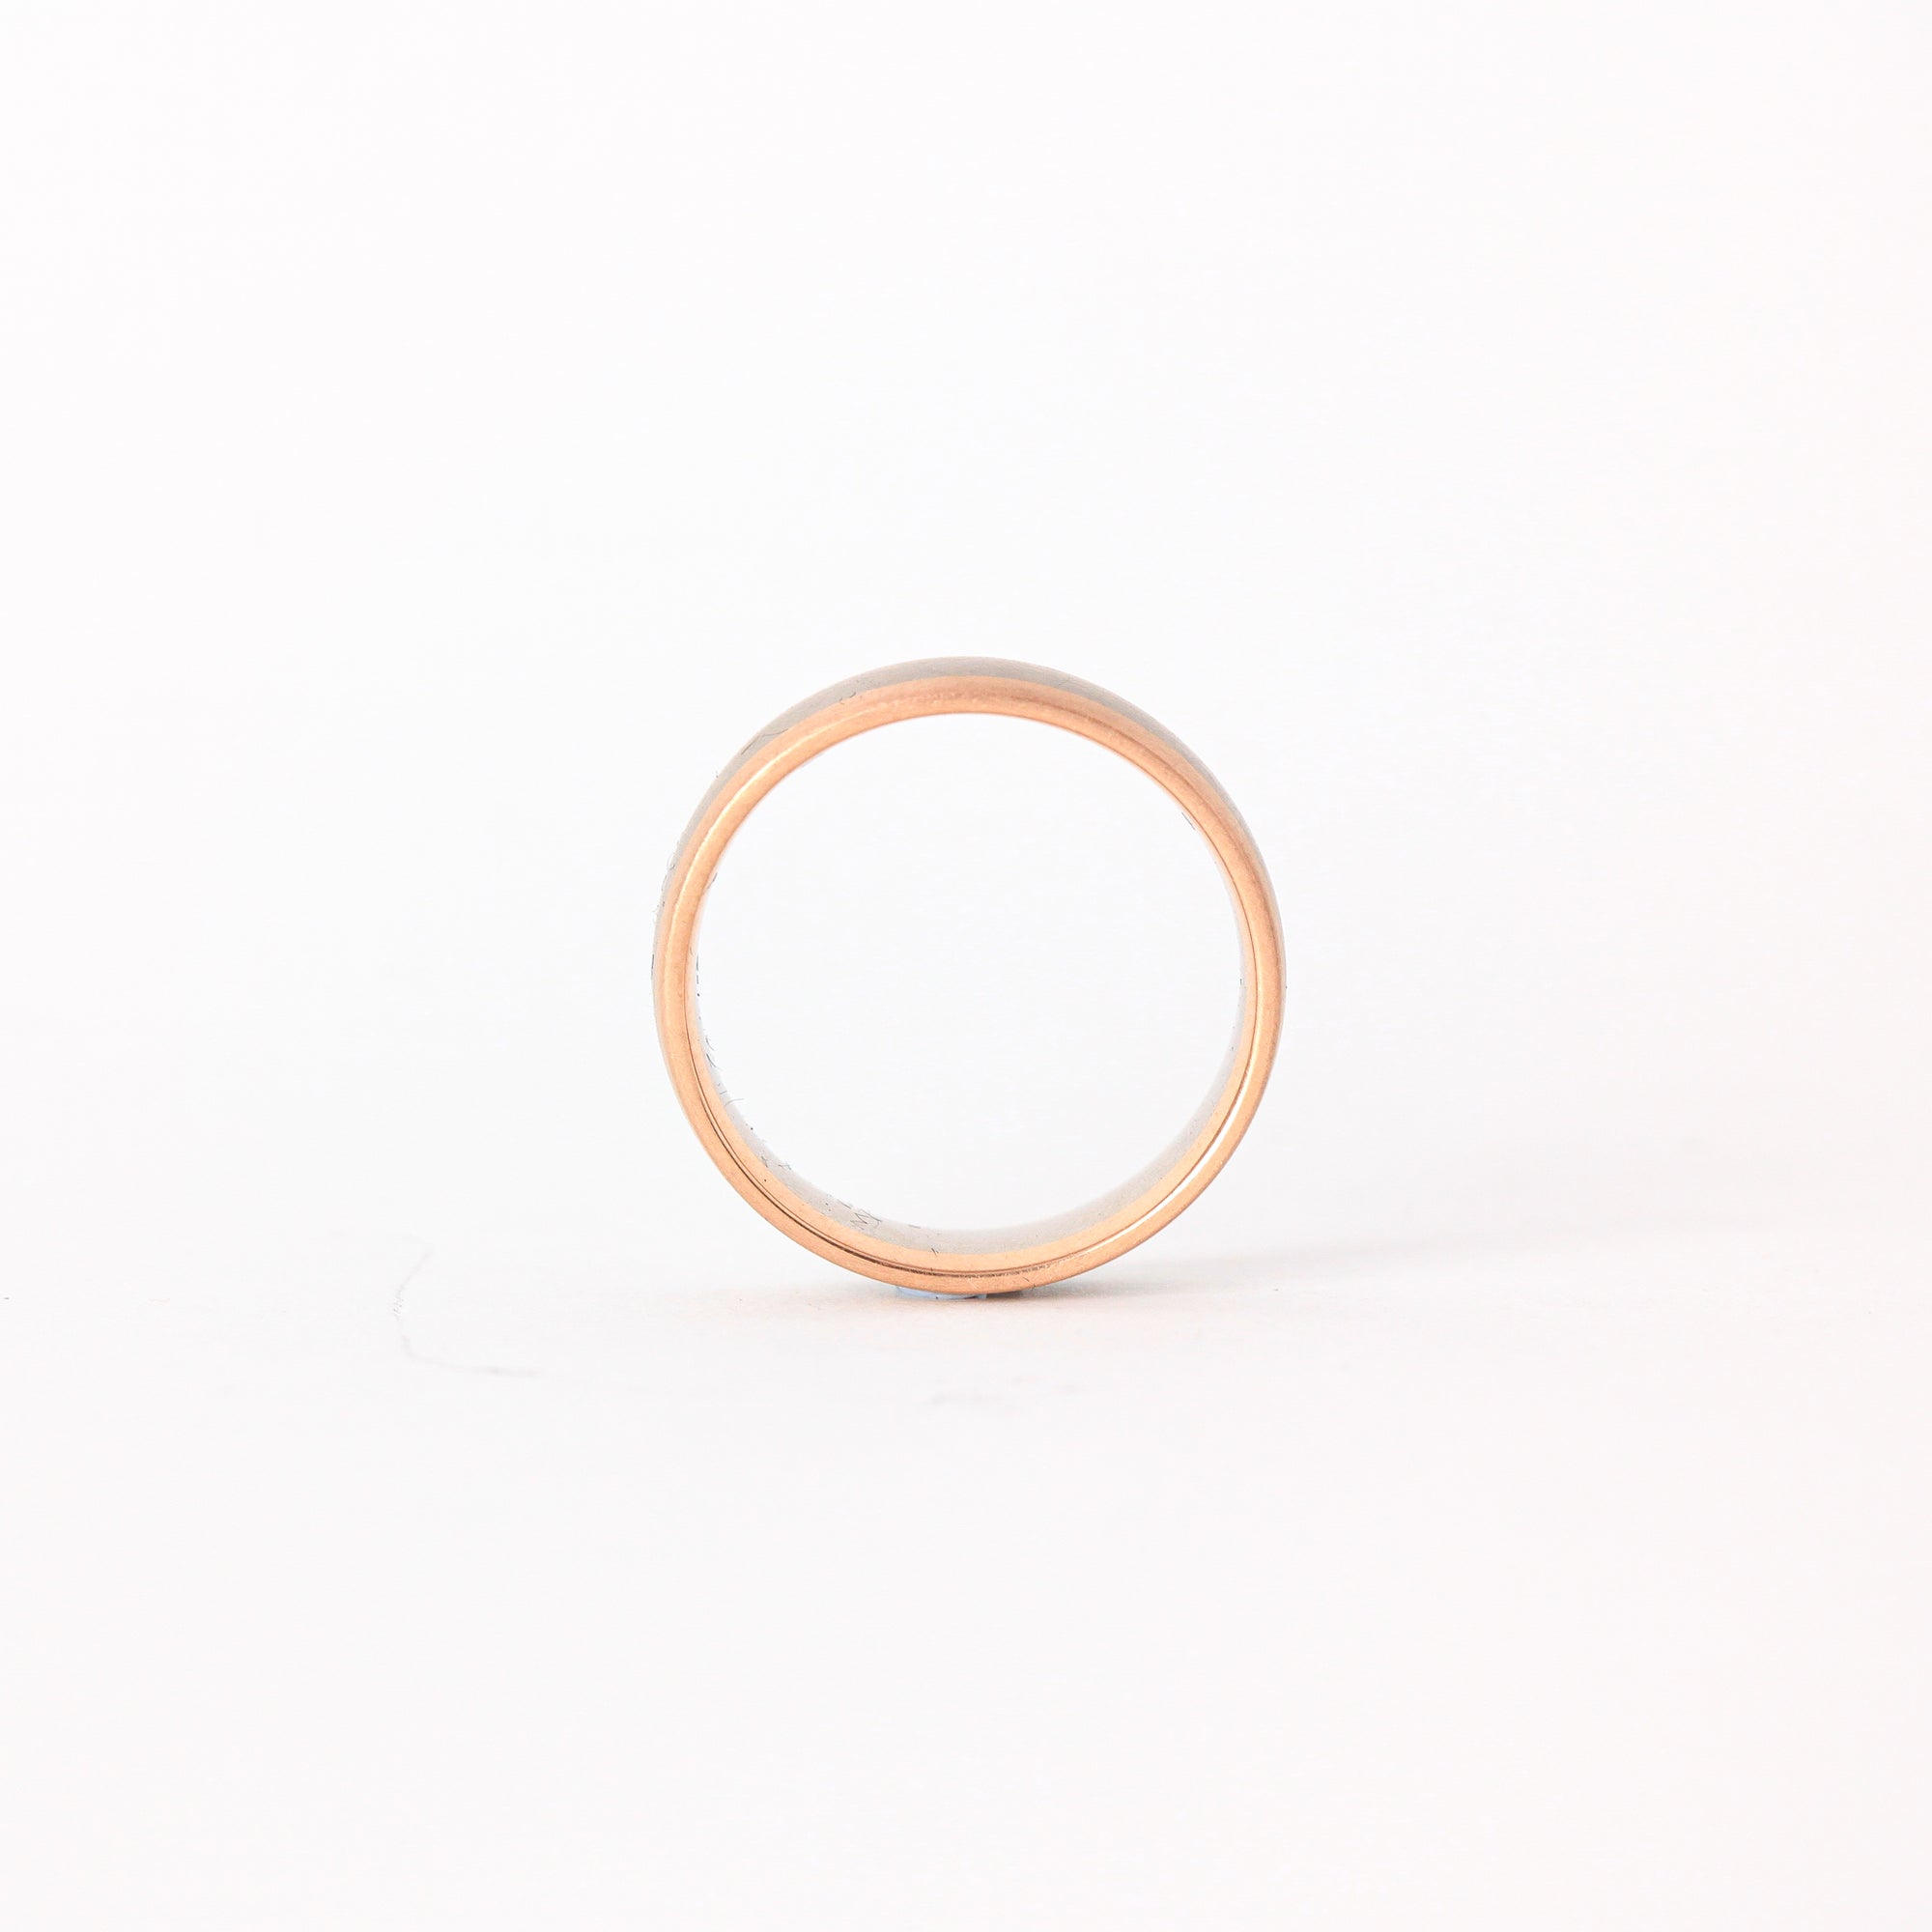 Handmade Wedding Band in 18ct White and Rose Gold